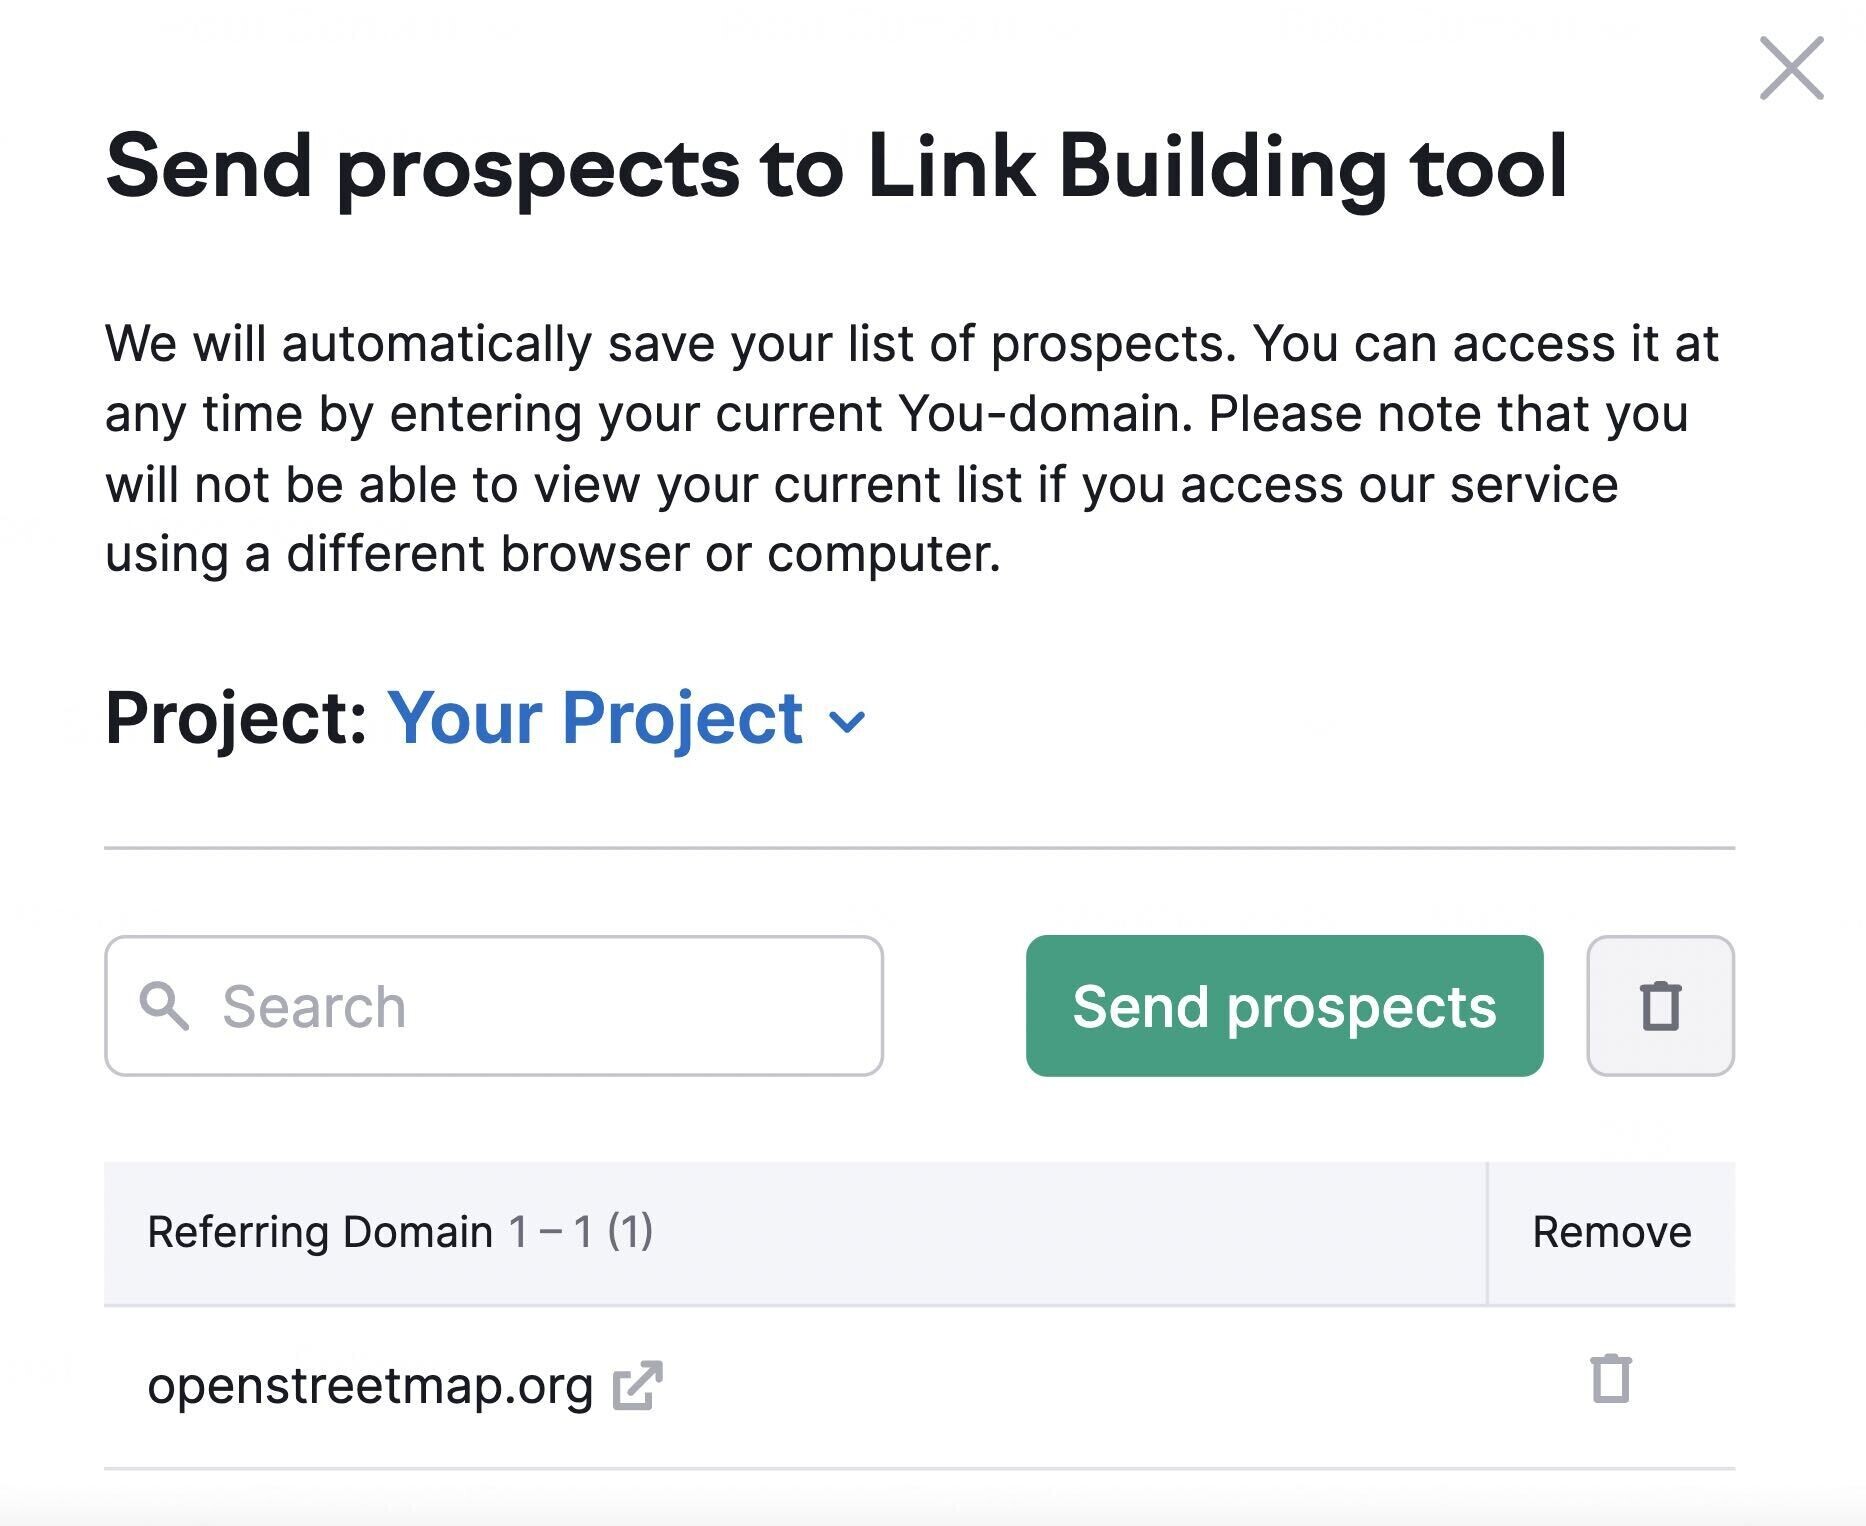 send prospects to link building tool